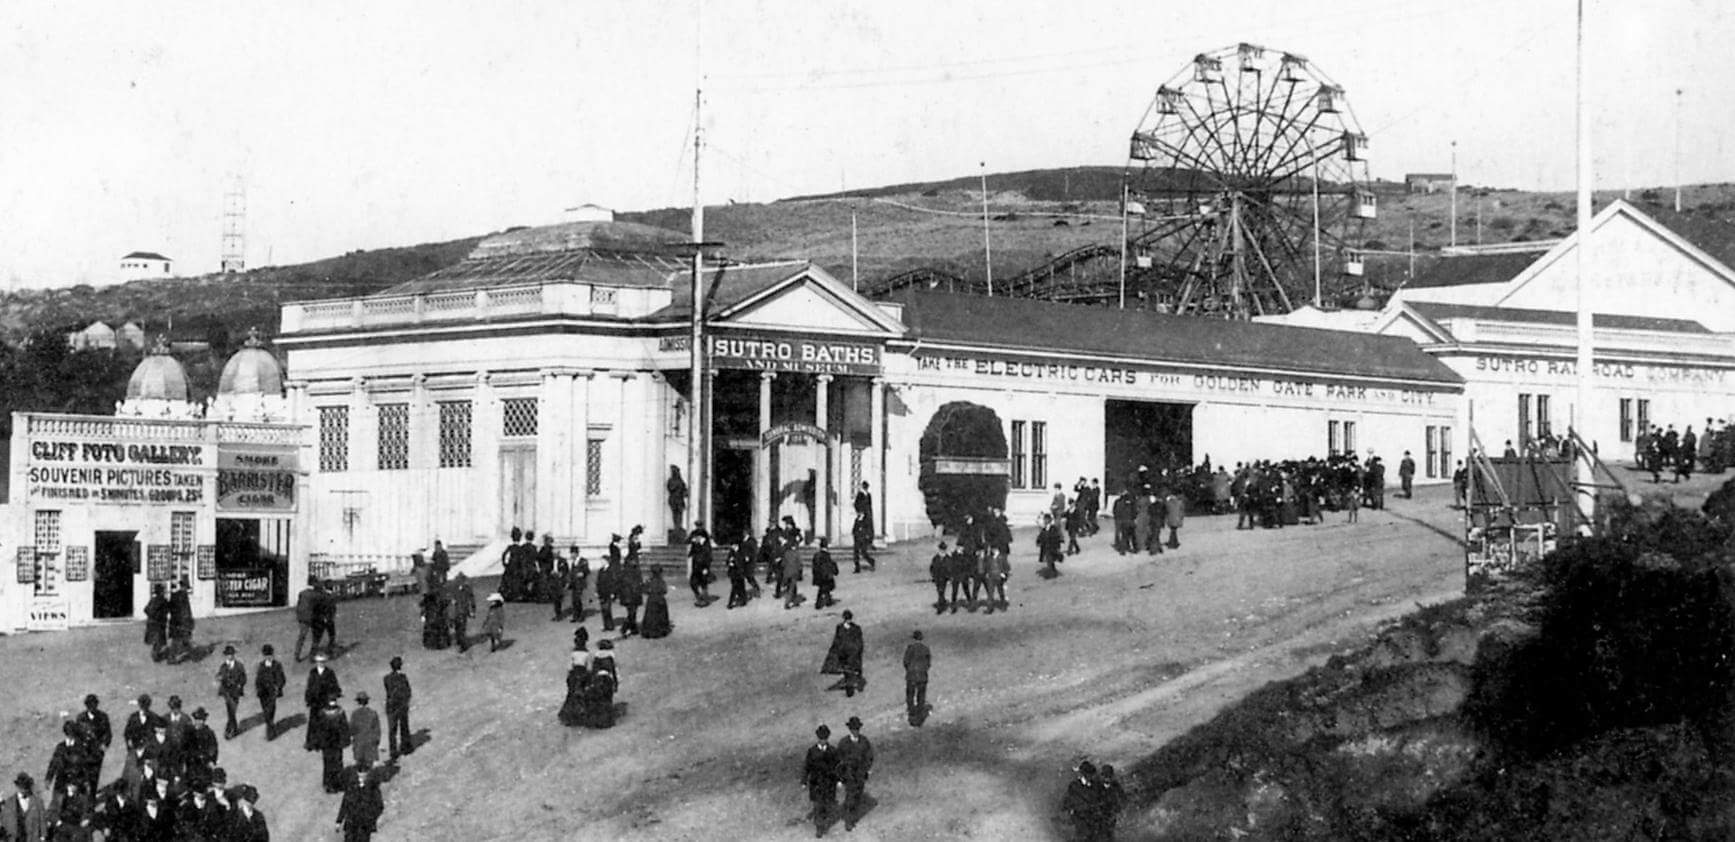 The Firth Wheel from the 1894 Mid Winter Fair at Sutro Baths until 1911